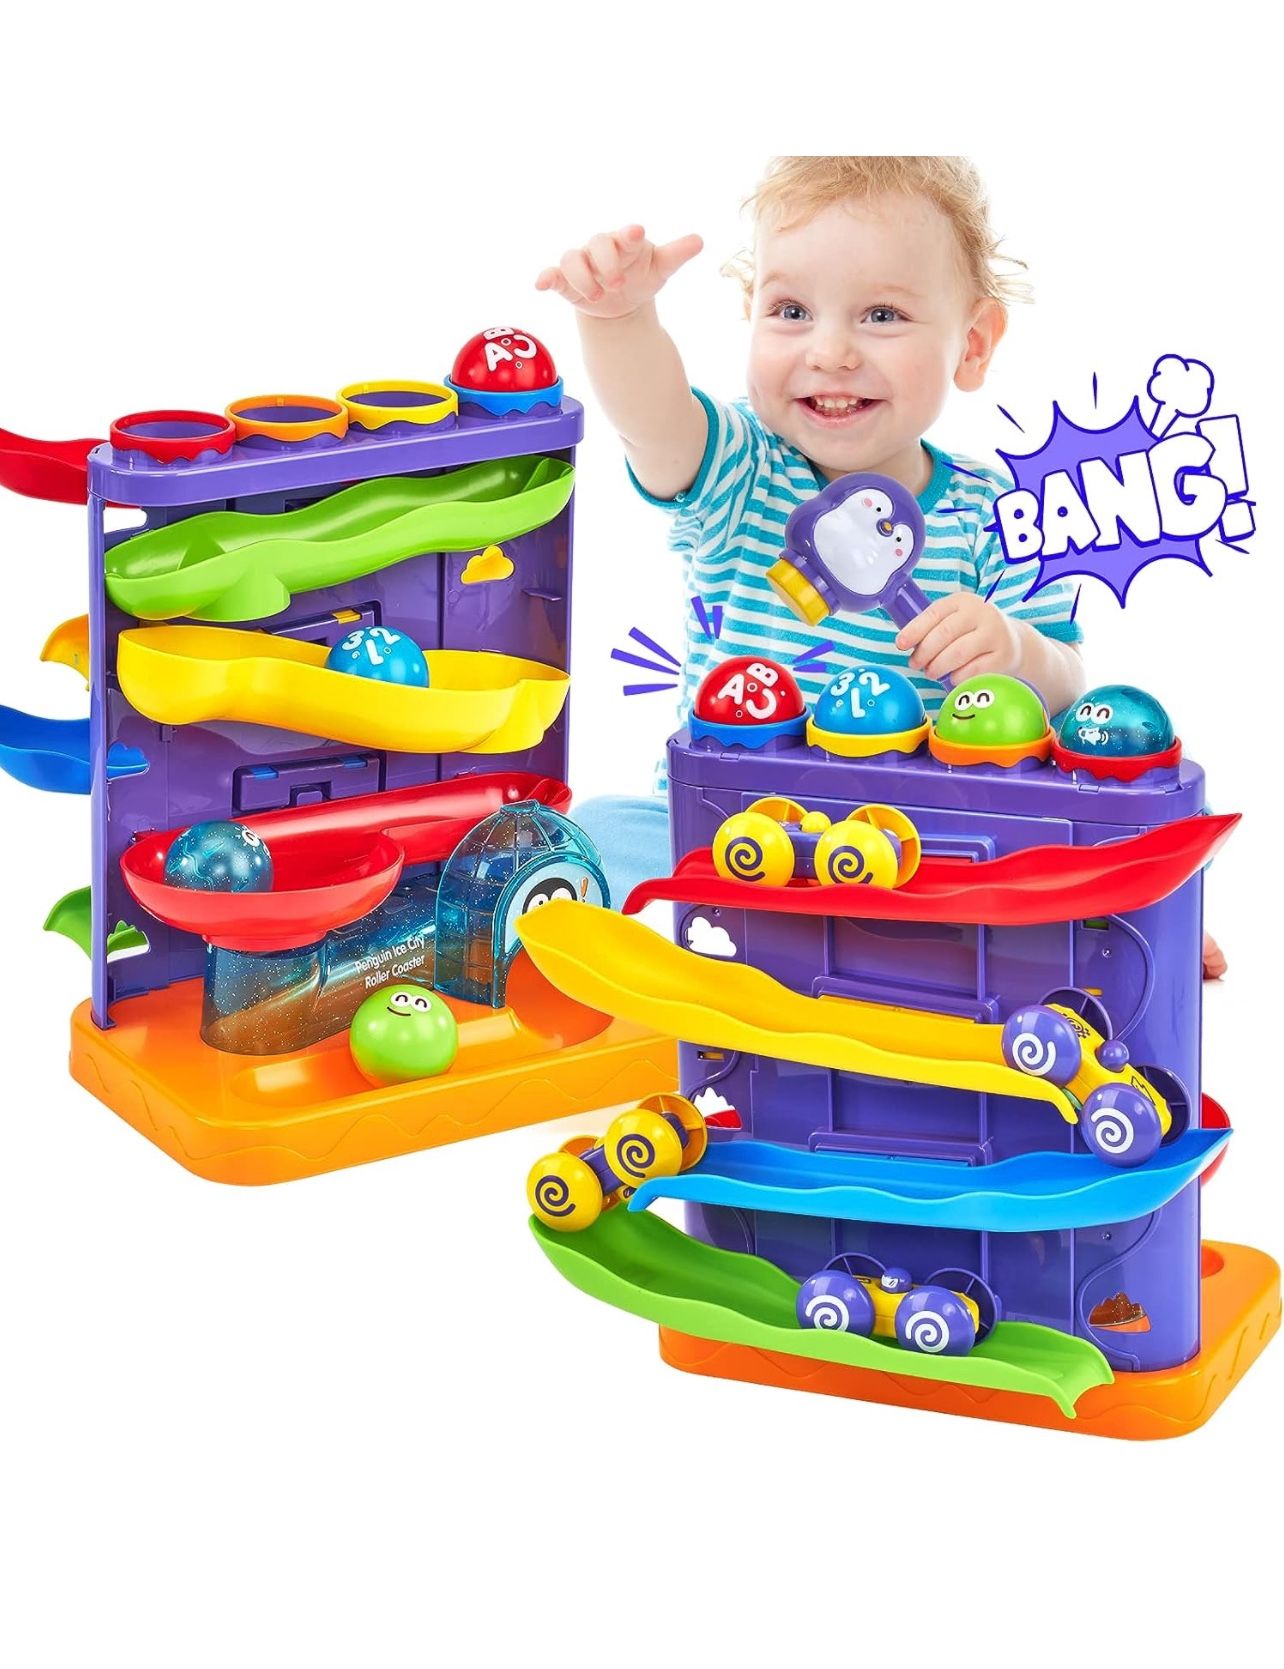 Brandnew Toddler Toys for 1 Year Old Boy Birthday Gift 2 in 1 Pound Ball Toy & Car Ramp Race Track Learning Active Early Developmental Montessori Toys